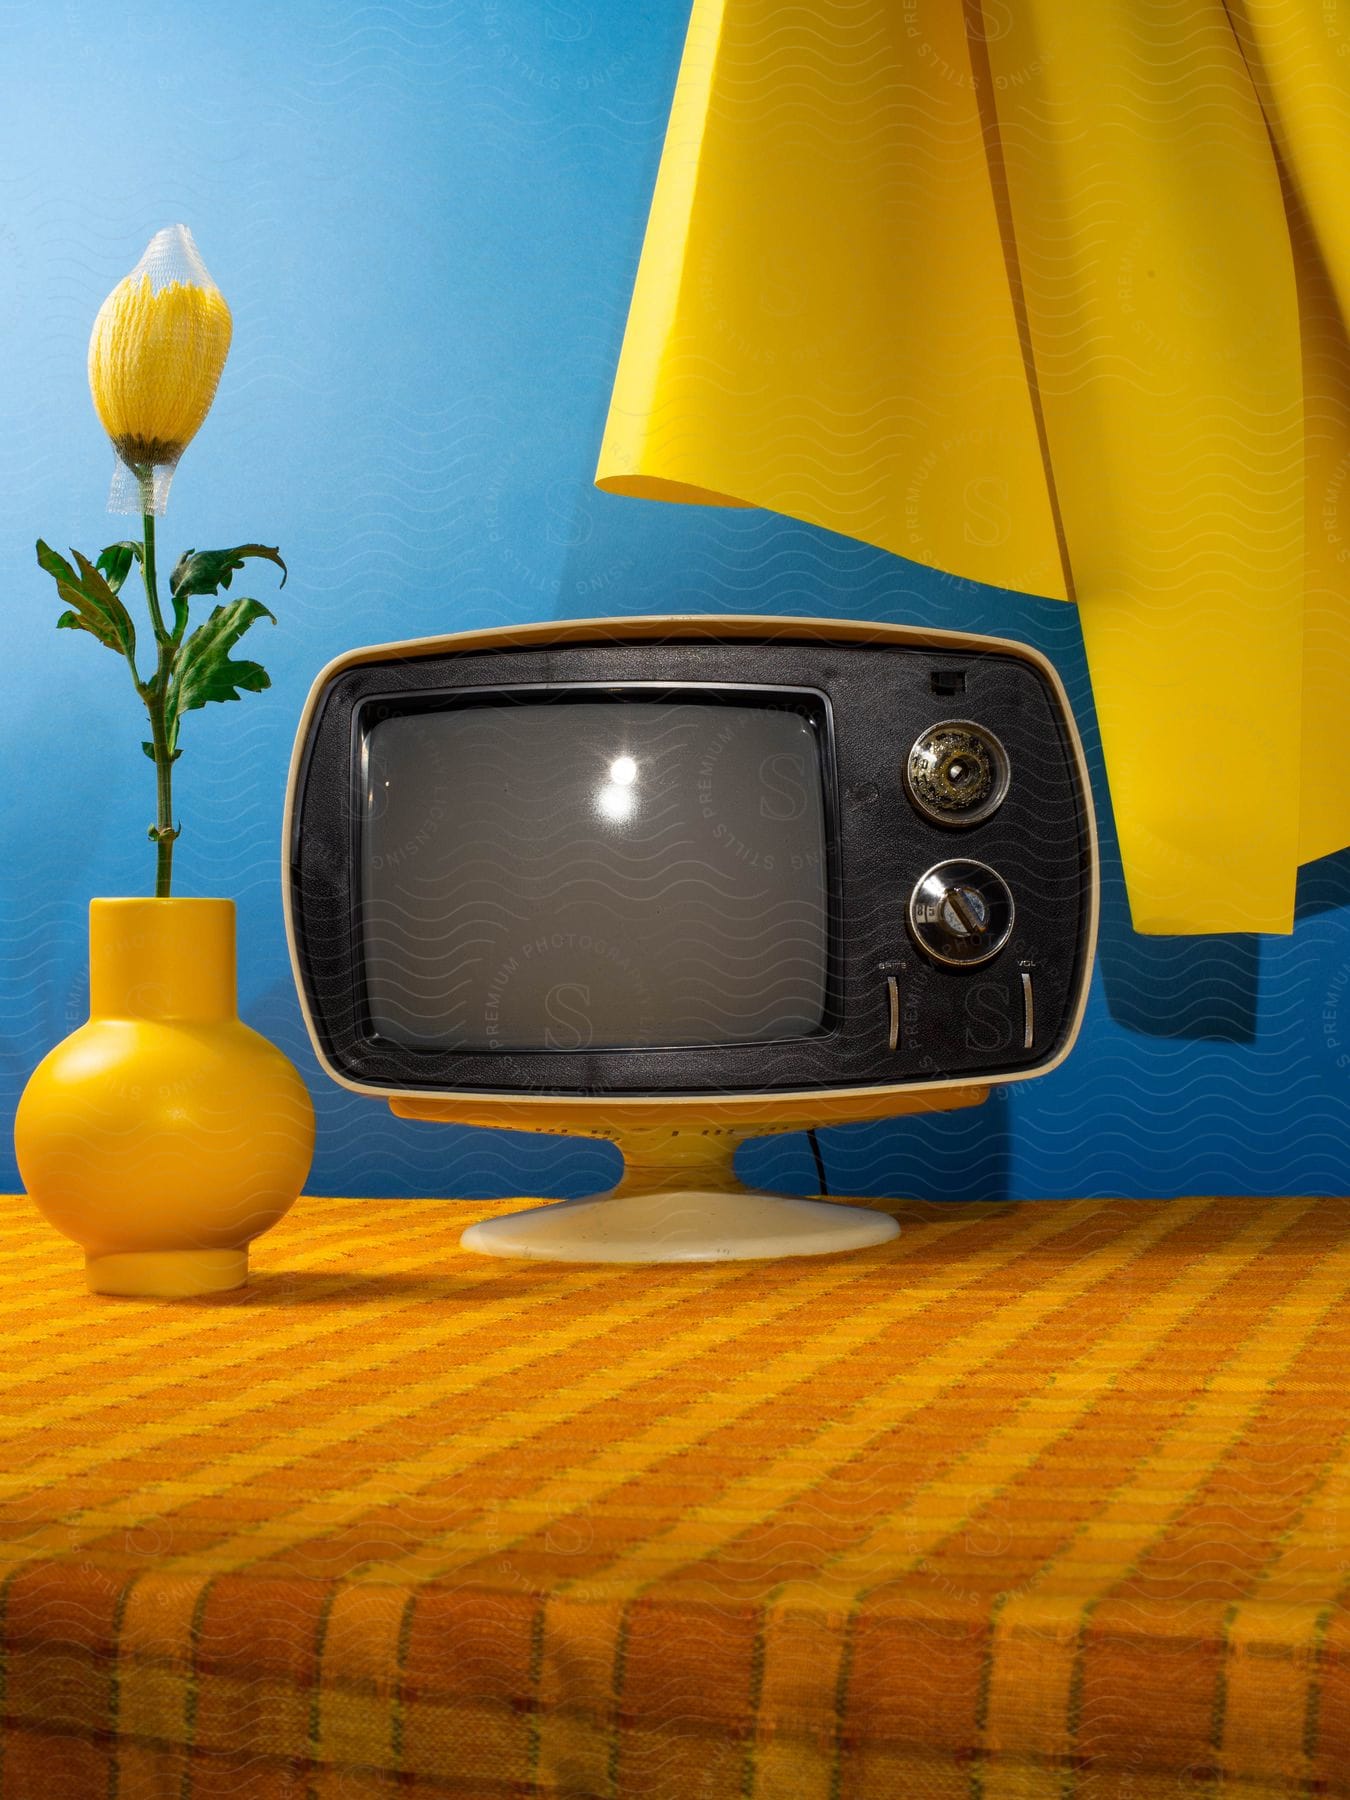 A retro yellow TV sits on a yellow checkered table with a yellow vase and flower, against a blue wall.